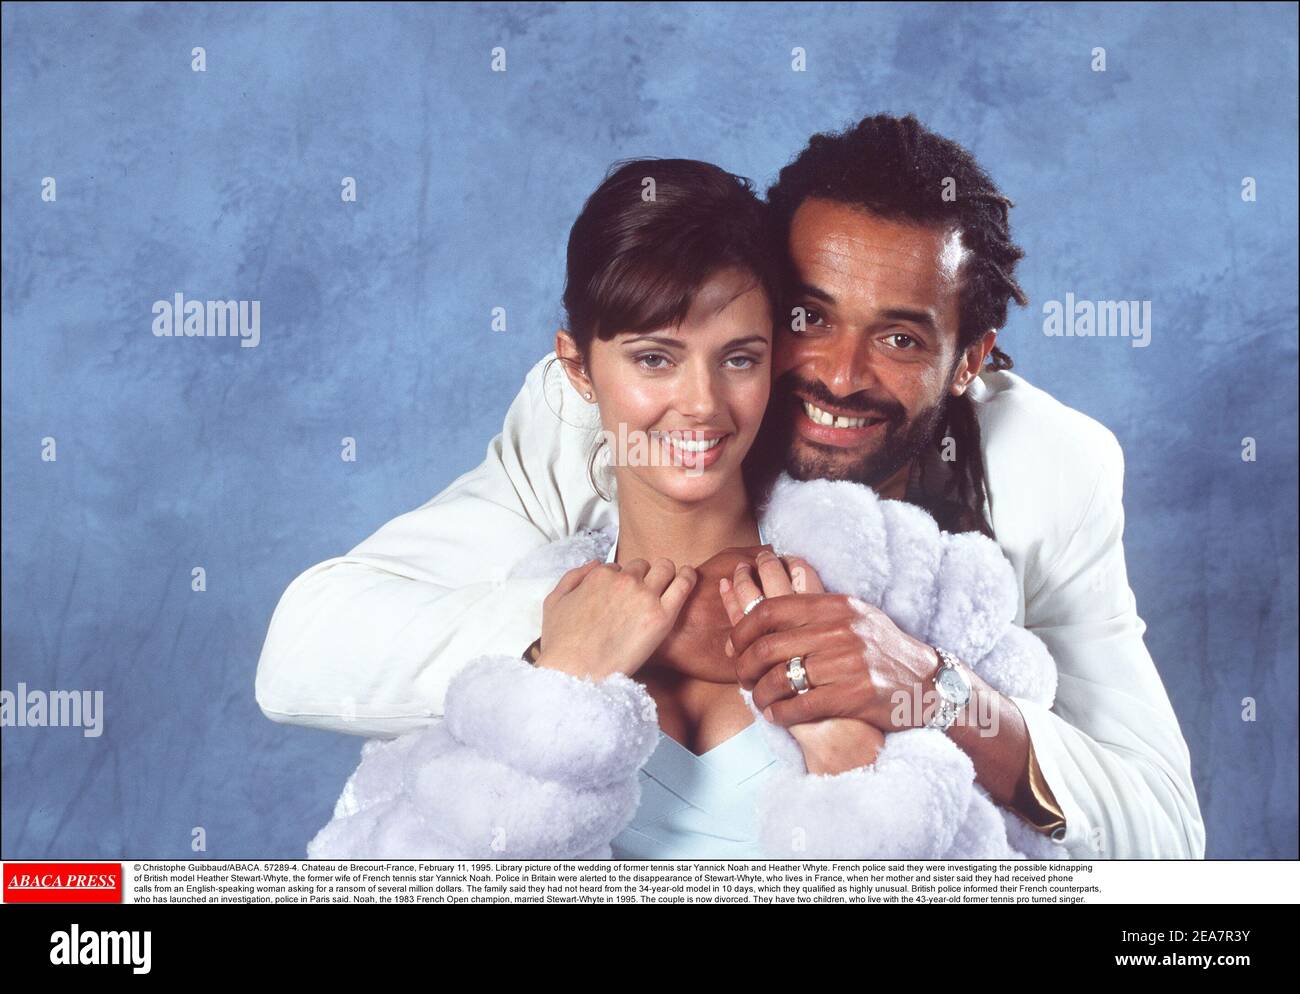 © Christophe Guibbaud/ABACA. 57289-4. Chateau de Brecourt-France, February 11, 1995. Library picture of the wedding of former tennis star Yannick Noah and Heather Whyte. French police said they were investigating the possible kidnapping of British model Heather Stewart-Whyte, the former wife of French tennis star Yannick Noah. Police in Britain were alerted to the disappearance of Stewart-Whyte, who lives in France, when her mother and sister said they had received phone calls from an English-speaking woman asking for a ransom of several million dollars. The family said they had not heard from Stock Photo